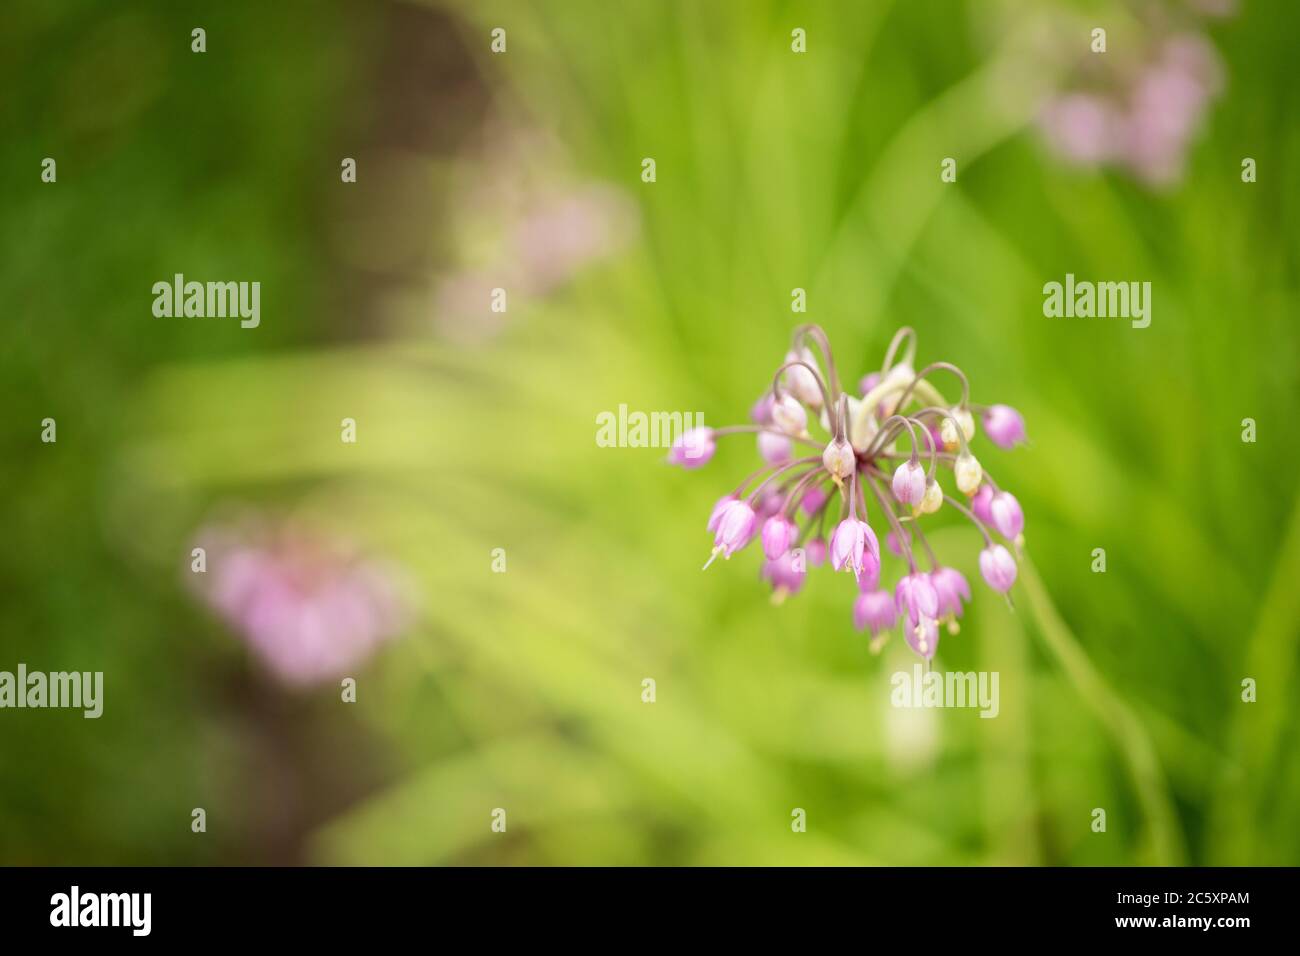 Allium cernuum, also known as nodding onion or lady's leek, in family Amaryllidaceae. Known for its pretty flowers, it can be used in cooking. Stock Photo